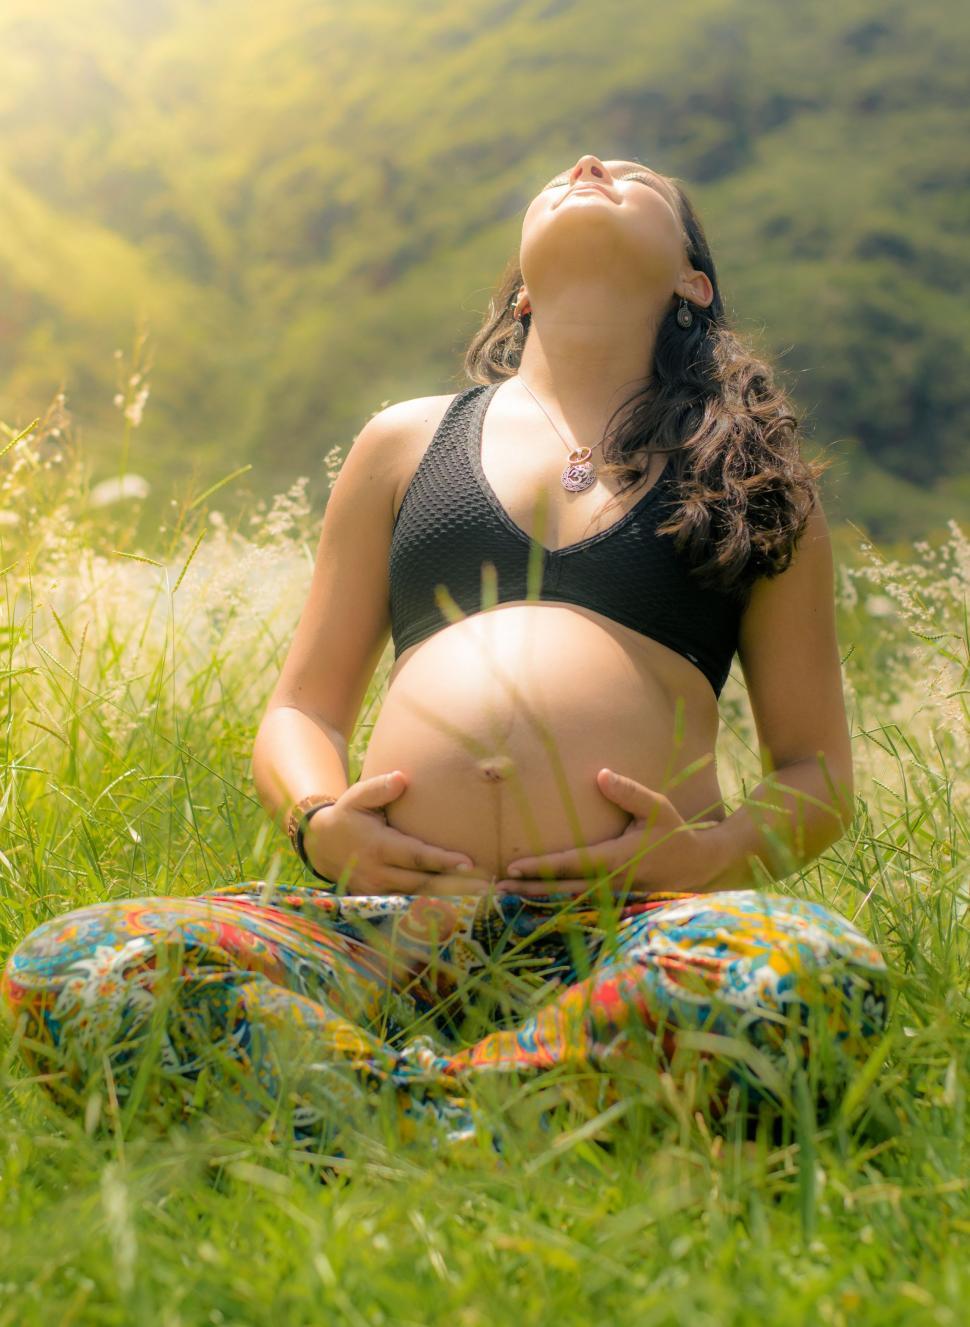 Free Image of Pregnant Woman Sitting in the Grass 